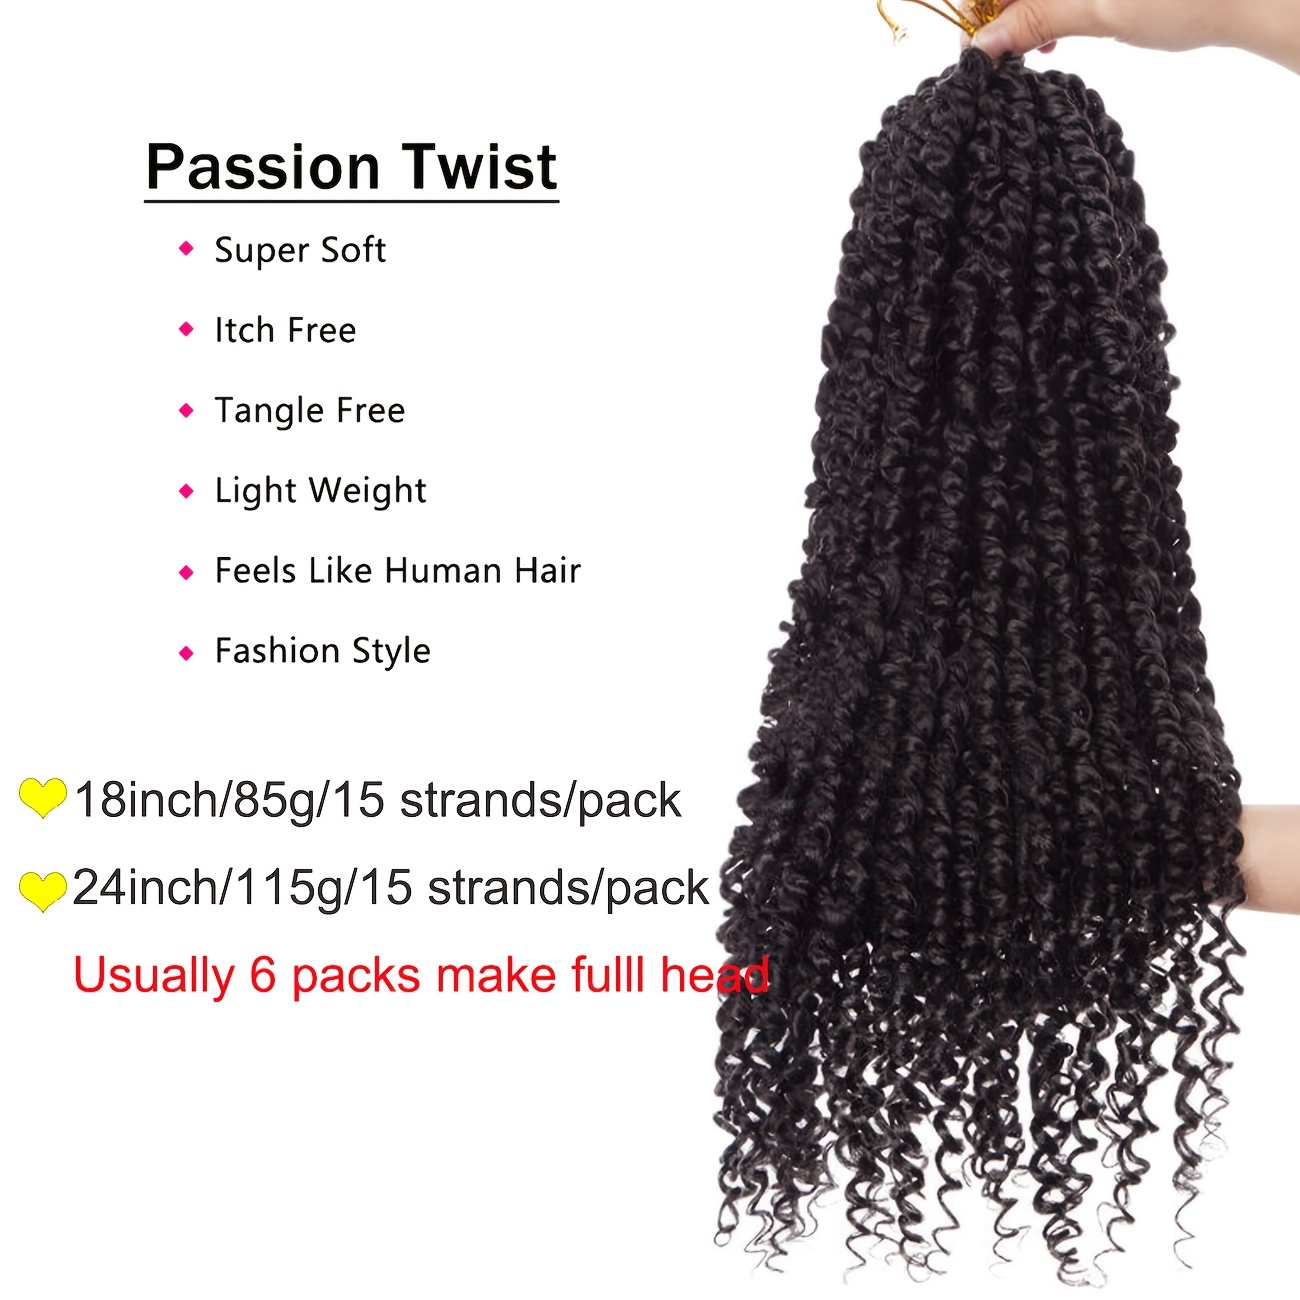 SEGO 18 inch Passion Twist Braiding Hair Water Wave Crochet Hair Passion  Twist Crochet Hair Braids Synthetic Crochet Hair Extensions